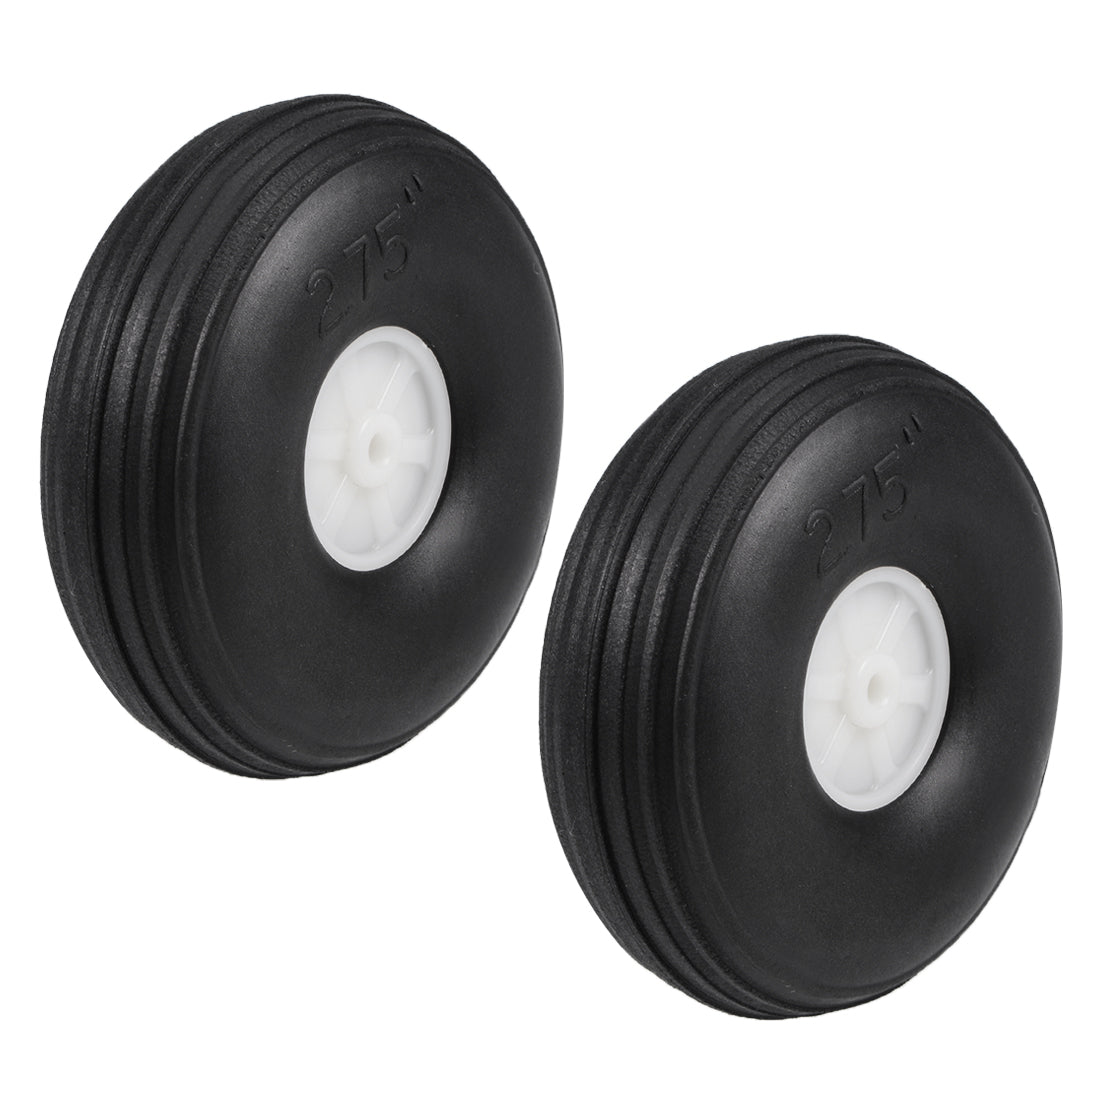 uxcell Uxcell Tire and Wheel Sets for RC Airplane,PU Sponge Tire with Plastic Hub,2.75" 2pcs